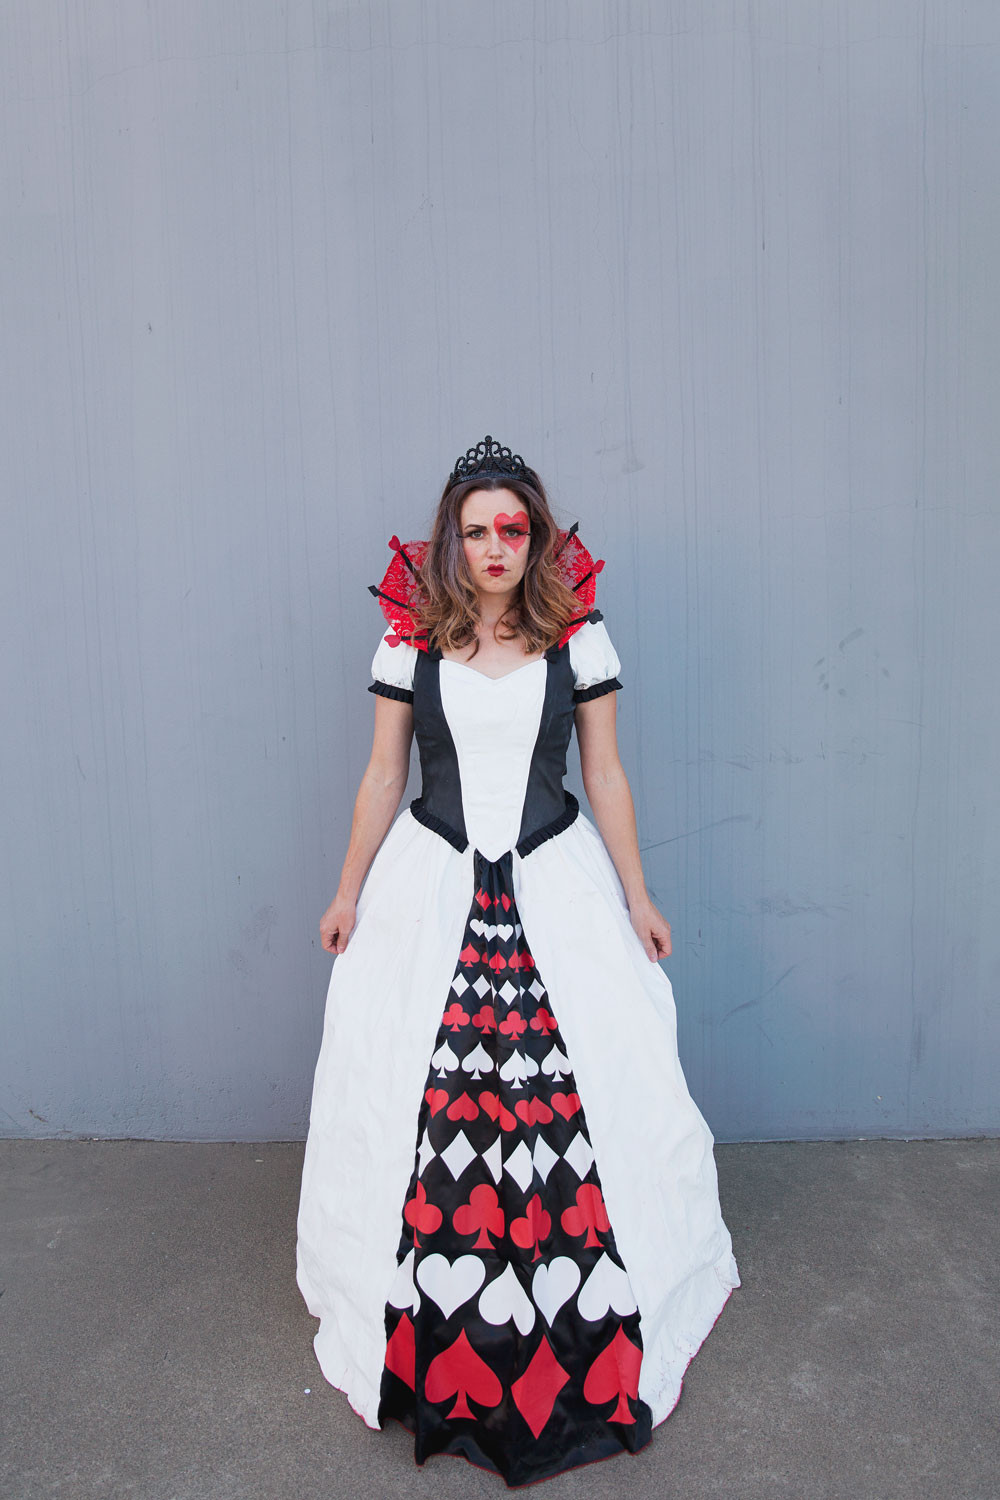 DIY Queen Of Hearts Costume
 DIY QUEEN OF HEARTS FAMILY COSTUME Tell Love and Party